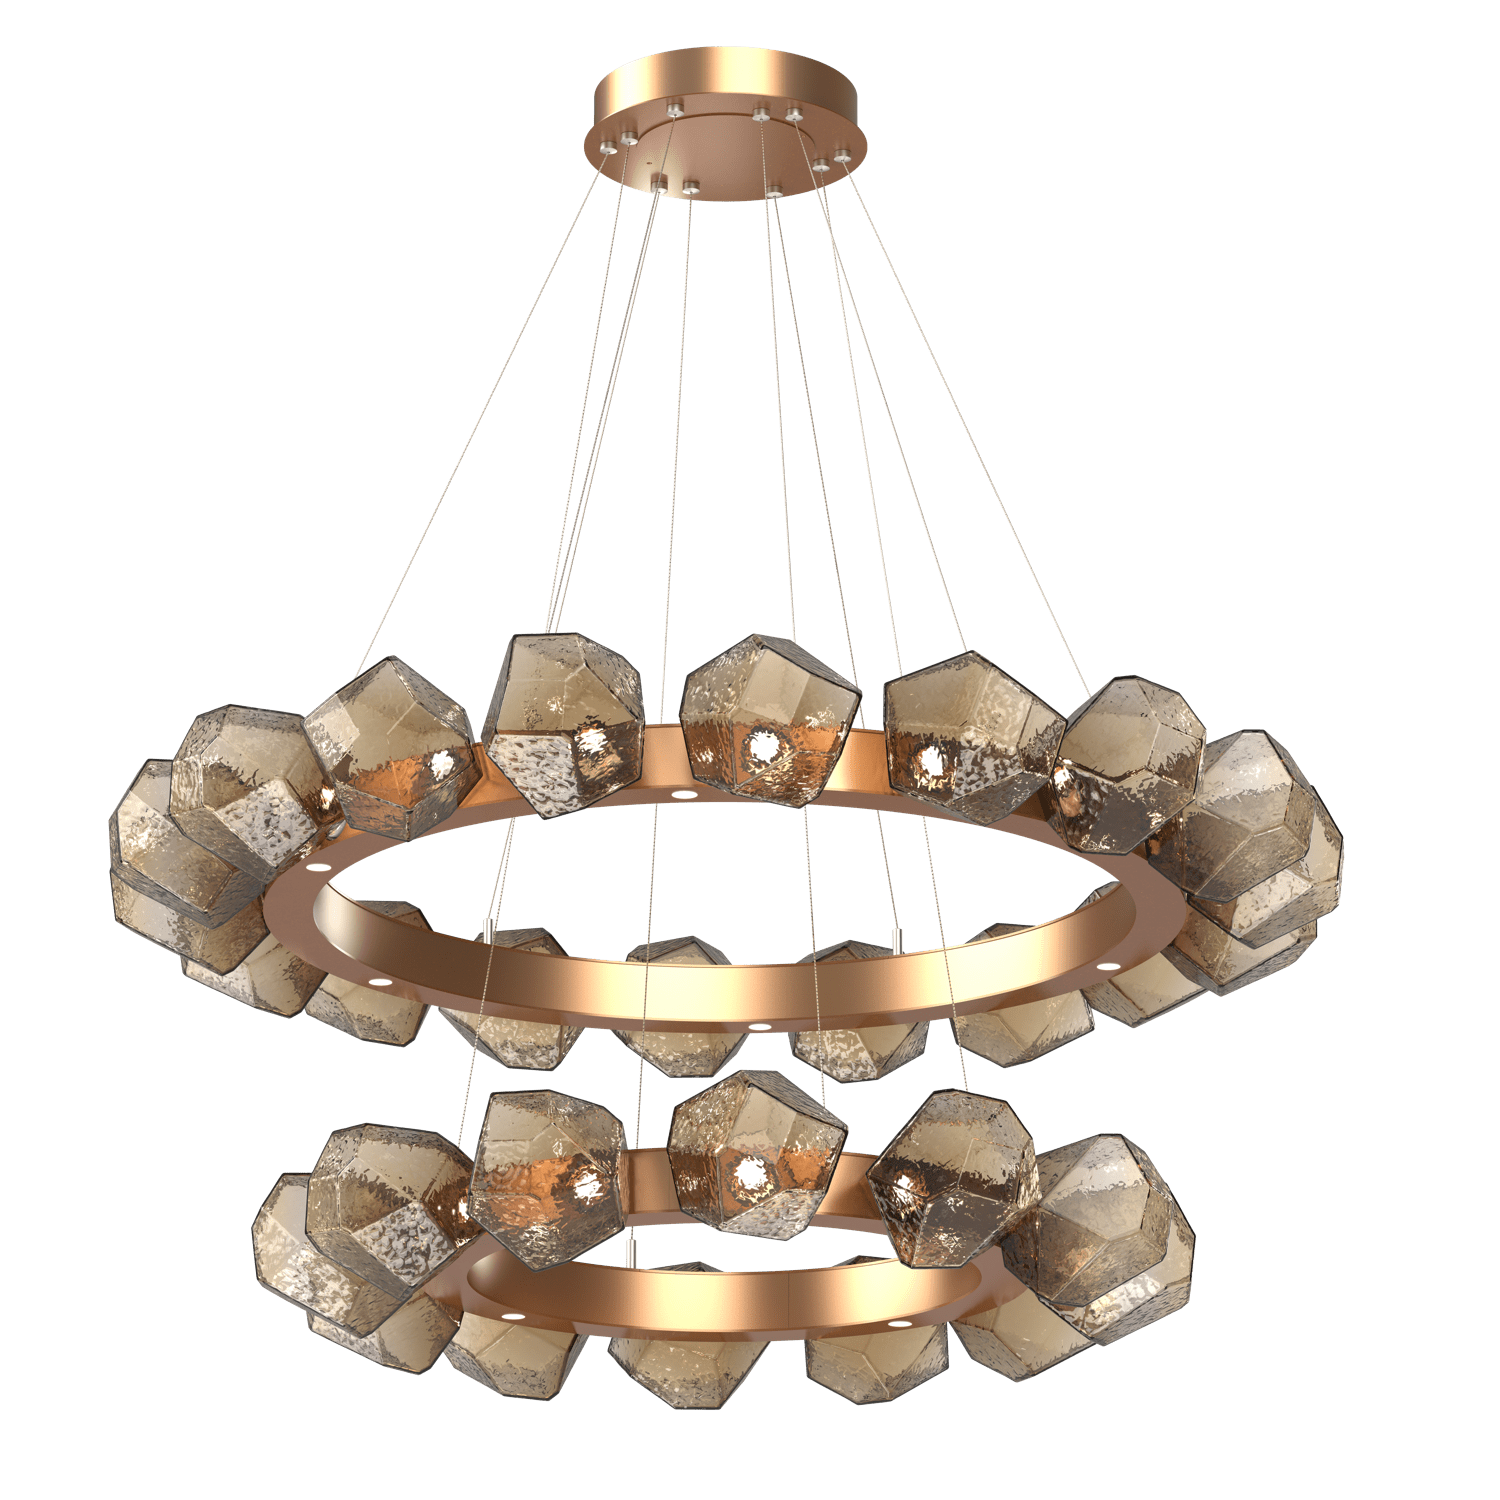 CHB0039-2T-NB-B-Hammerton-Studio-Gem-48-inch-two-tier-radial-ring-chandelier-with-novel-brass-finish-and-bronze-blown-glass-shades-and-LED-lamping